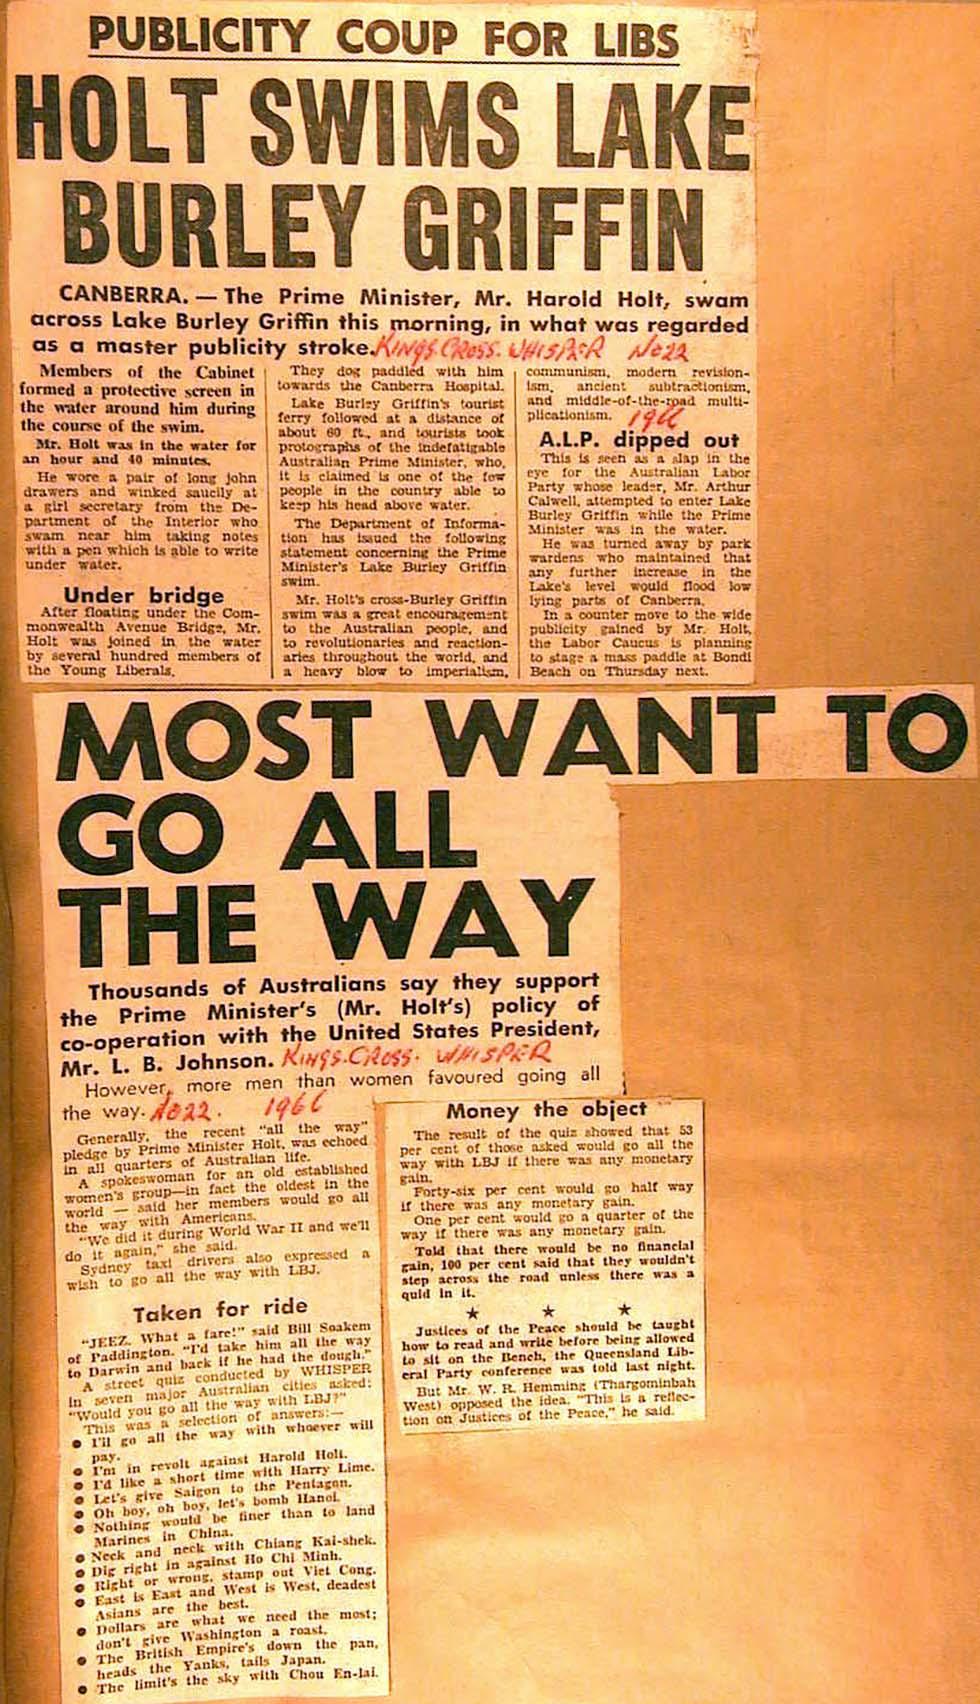 Press clippings kept by Prime Minister Harold Holt in the lead up to the 1966 election.